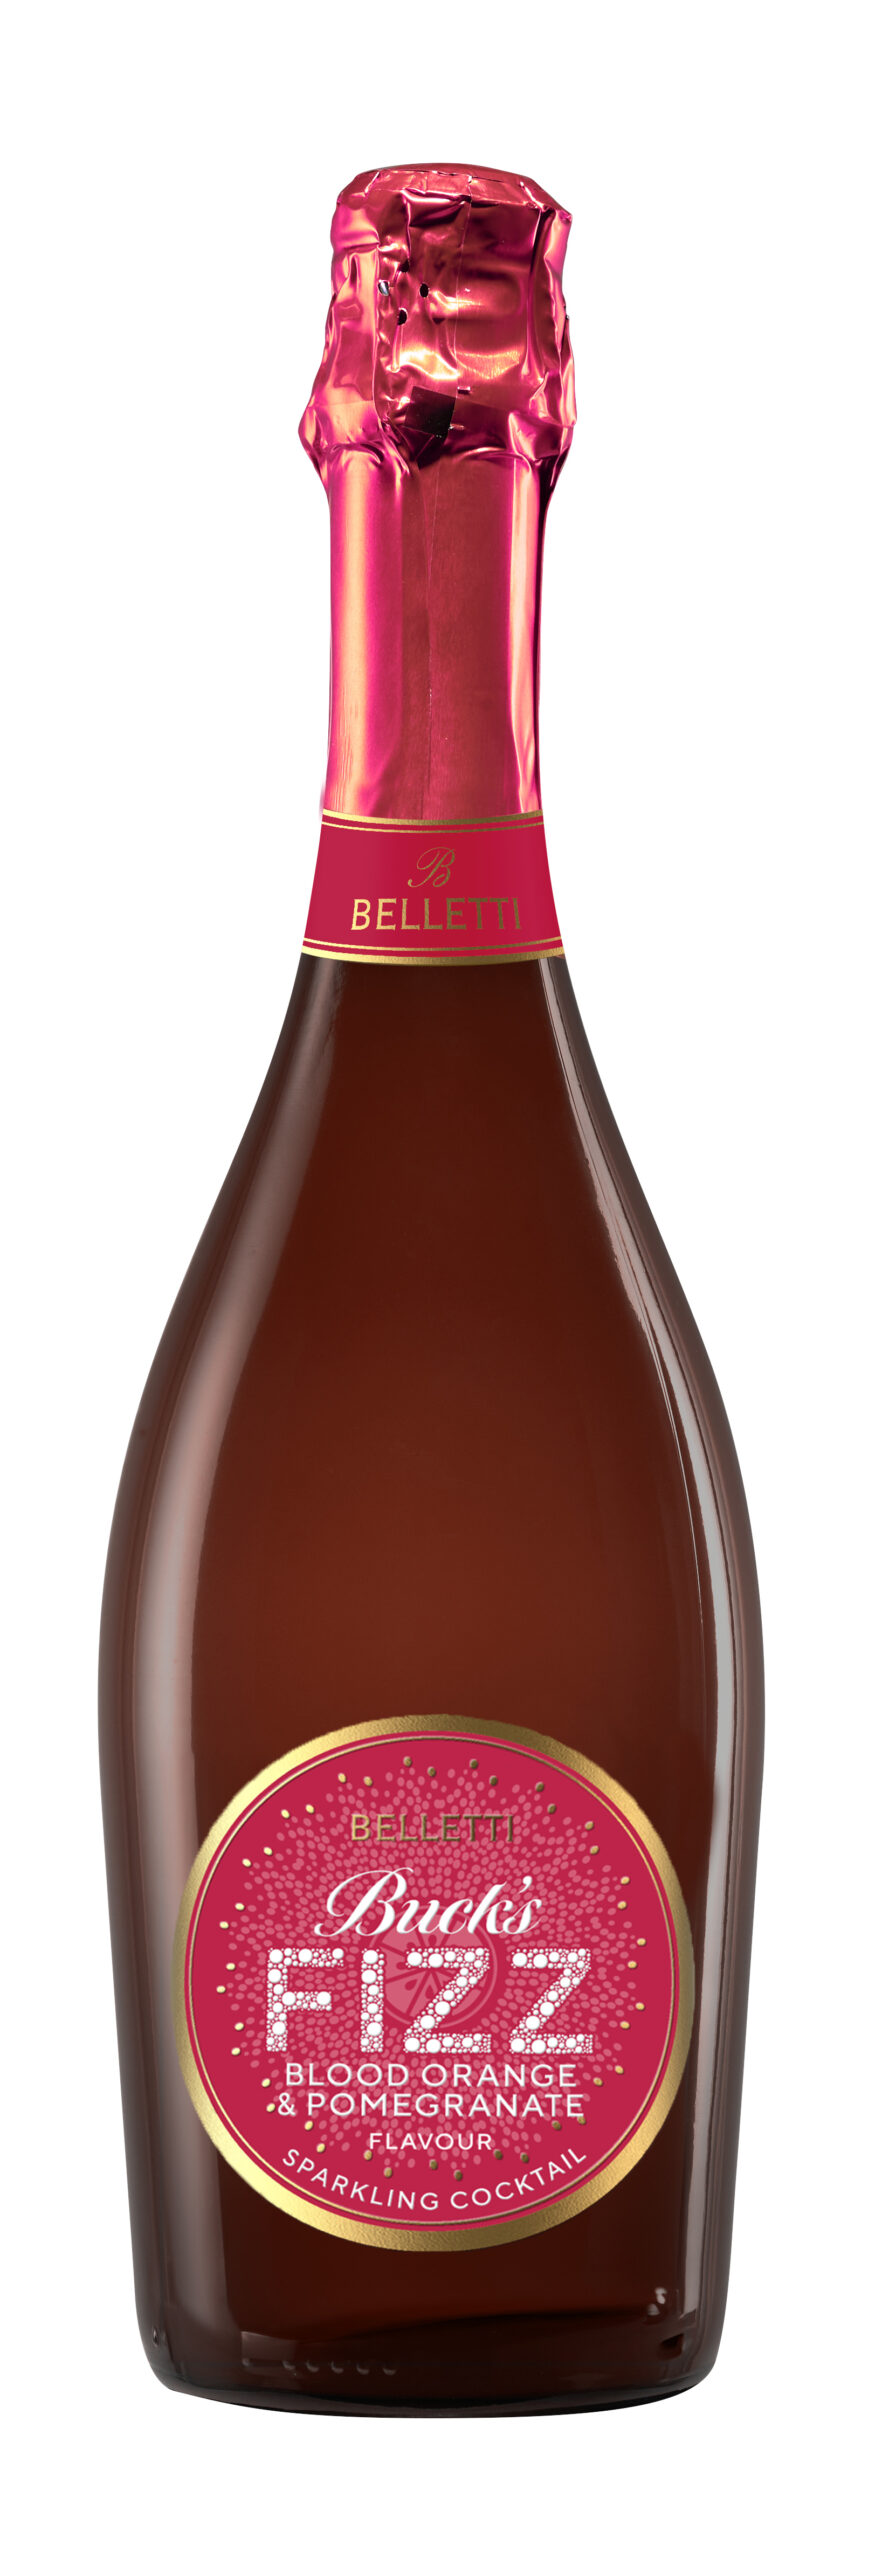 A red wine bottle with a pink and gold circular label.